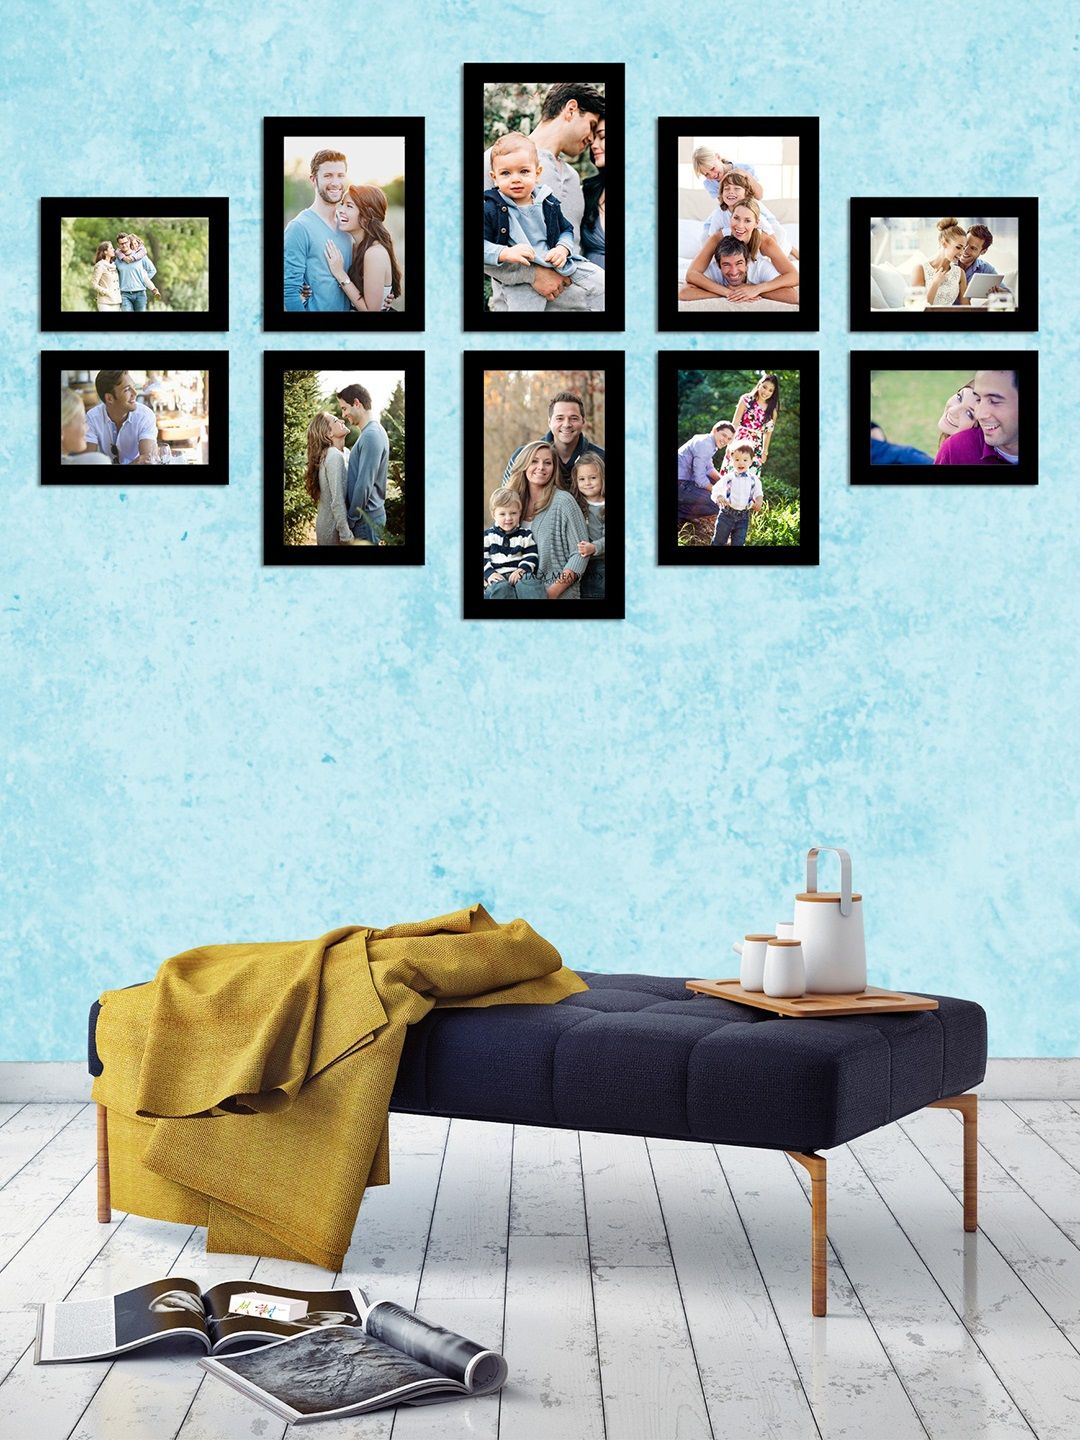 Art Street Black Solid Set Of 10 Wall Photo Frames Price in India